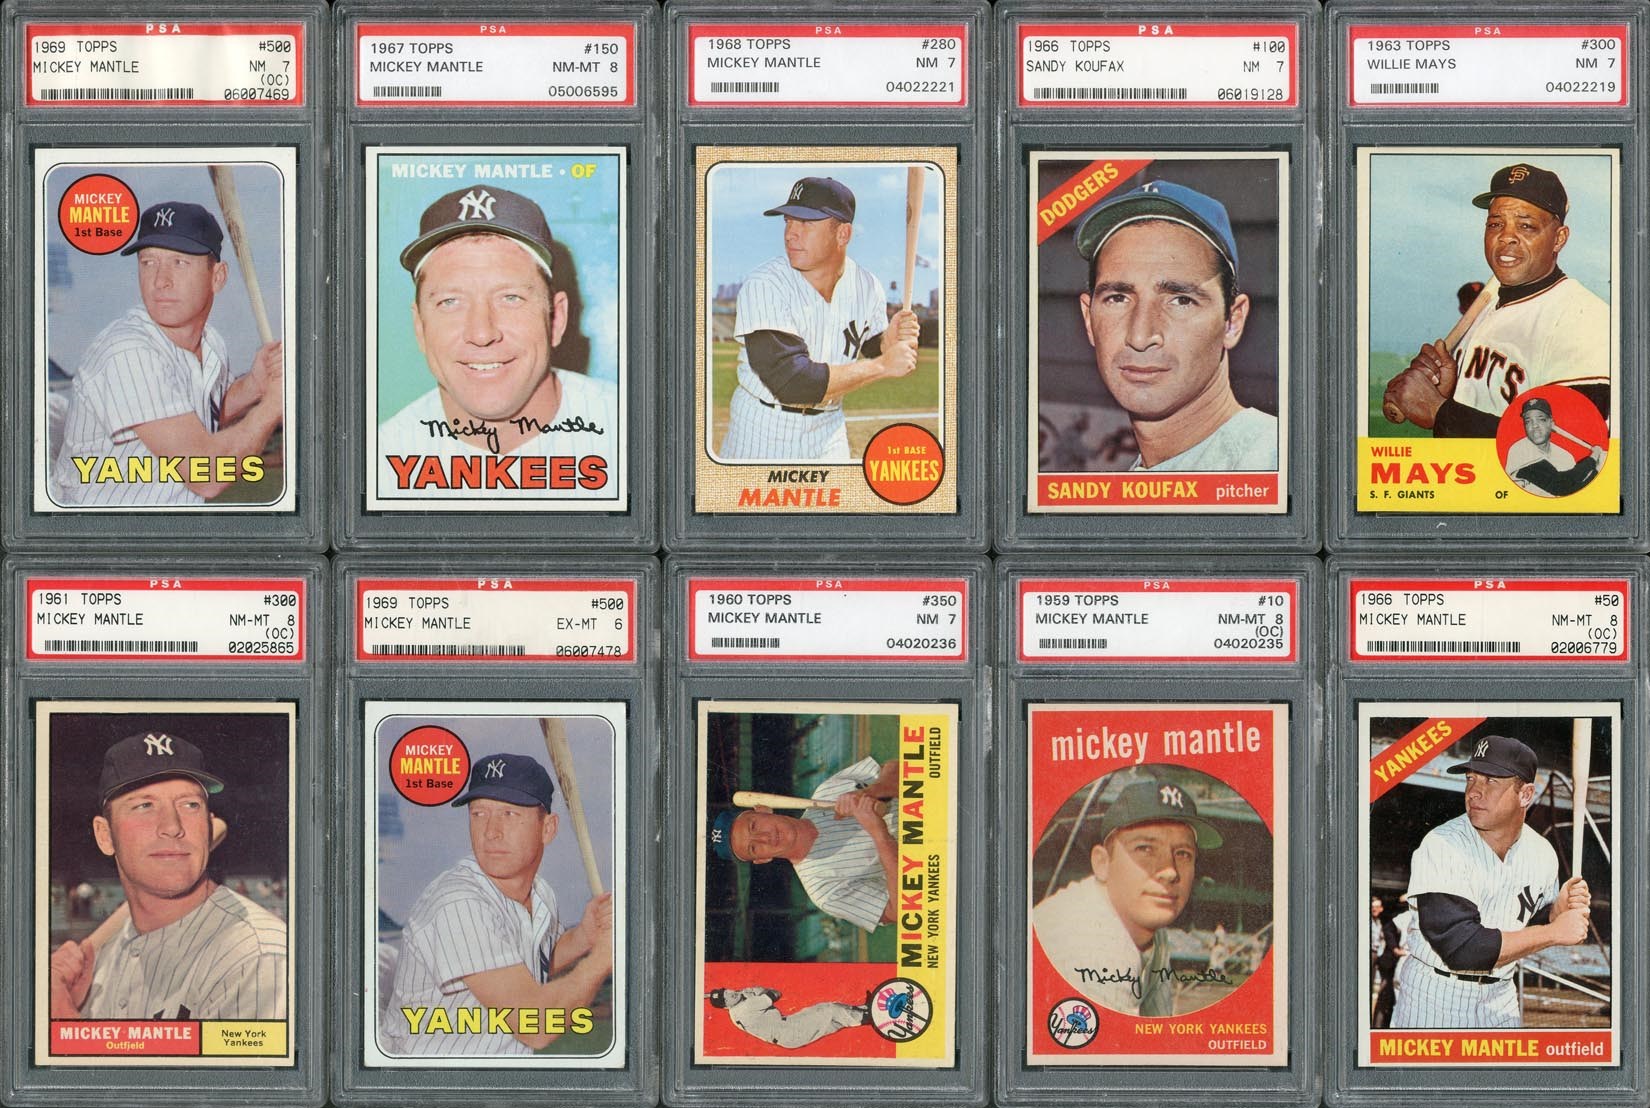 Baseball and Trading Cards - High End 1960s Topps PSA Graded Collection with 11 Mantles (46 Total)